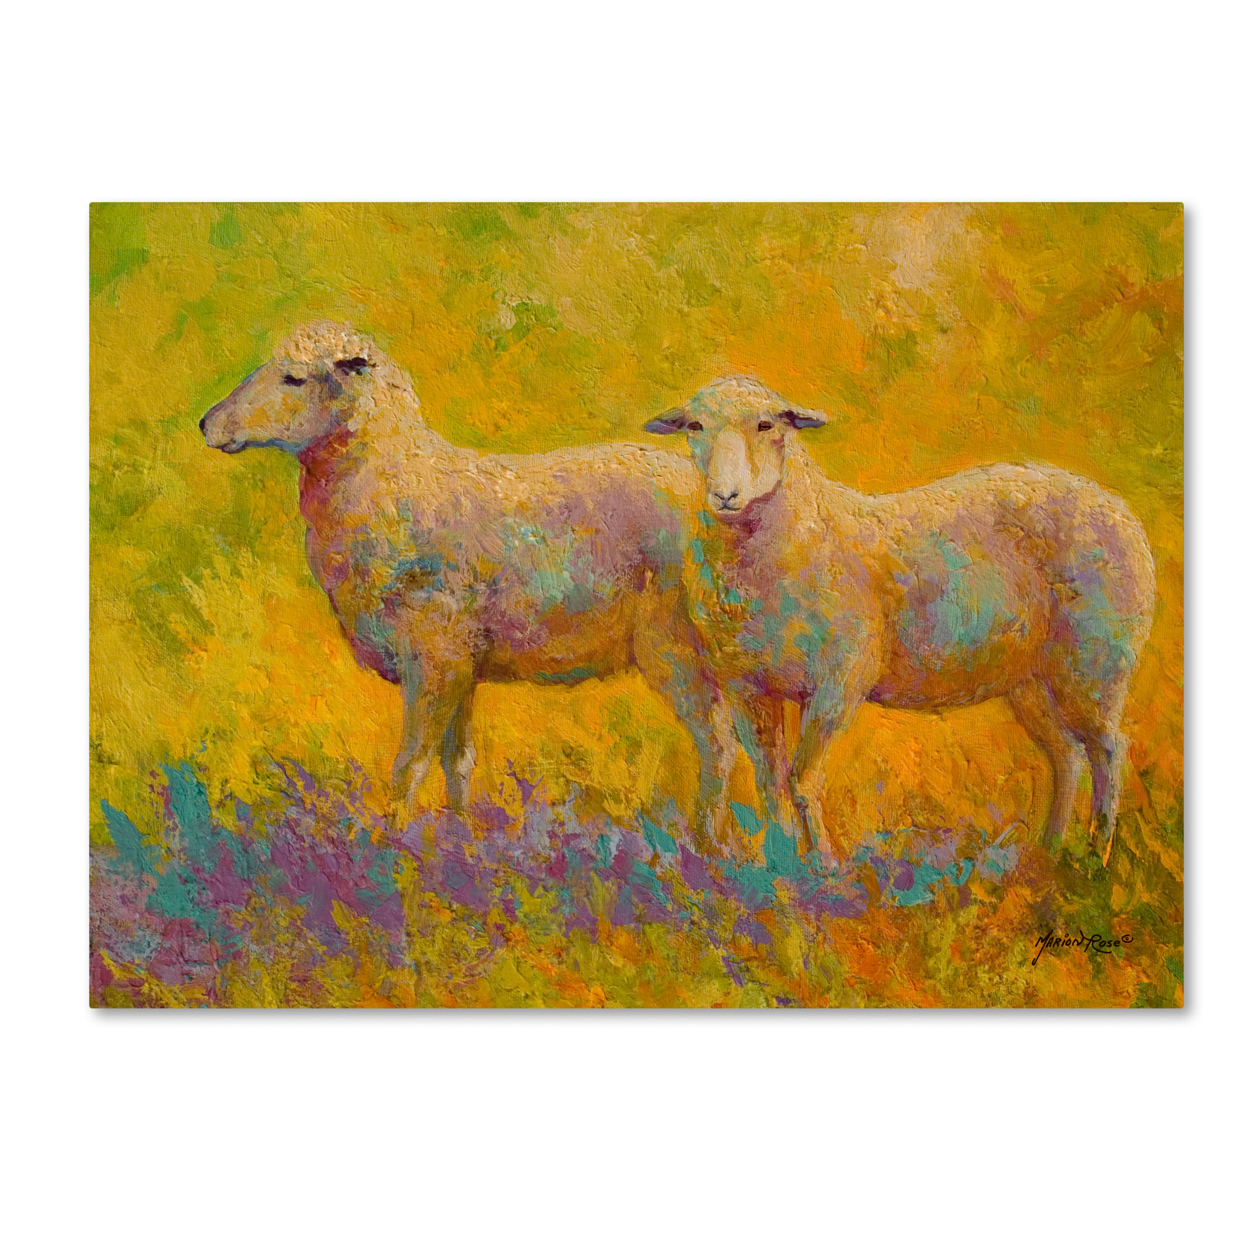 Marion Rose 'Warm Glow Sheep Pair' Ready To Hang Canvas Art 35 X 47 Inches Made In USA